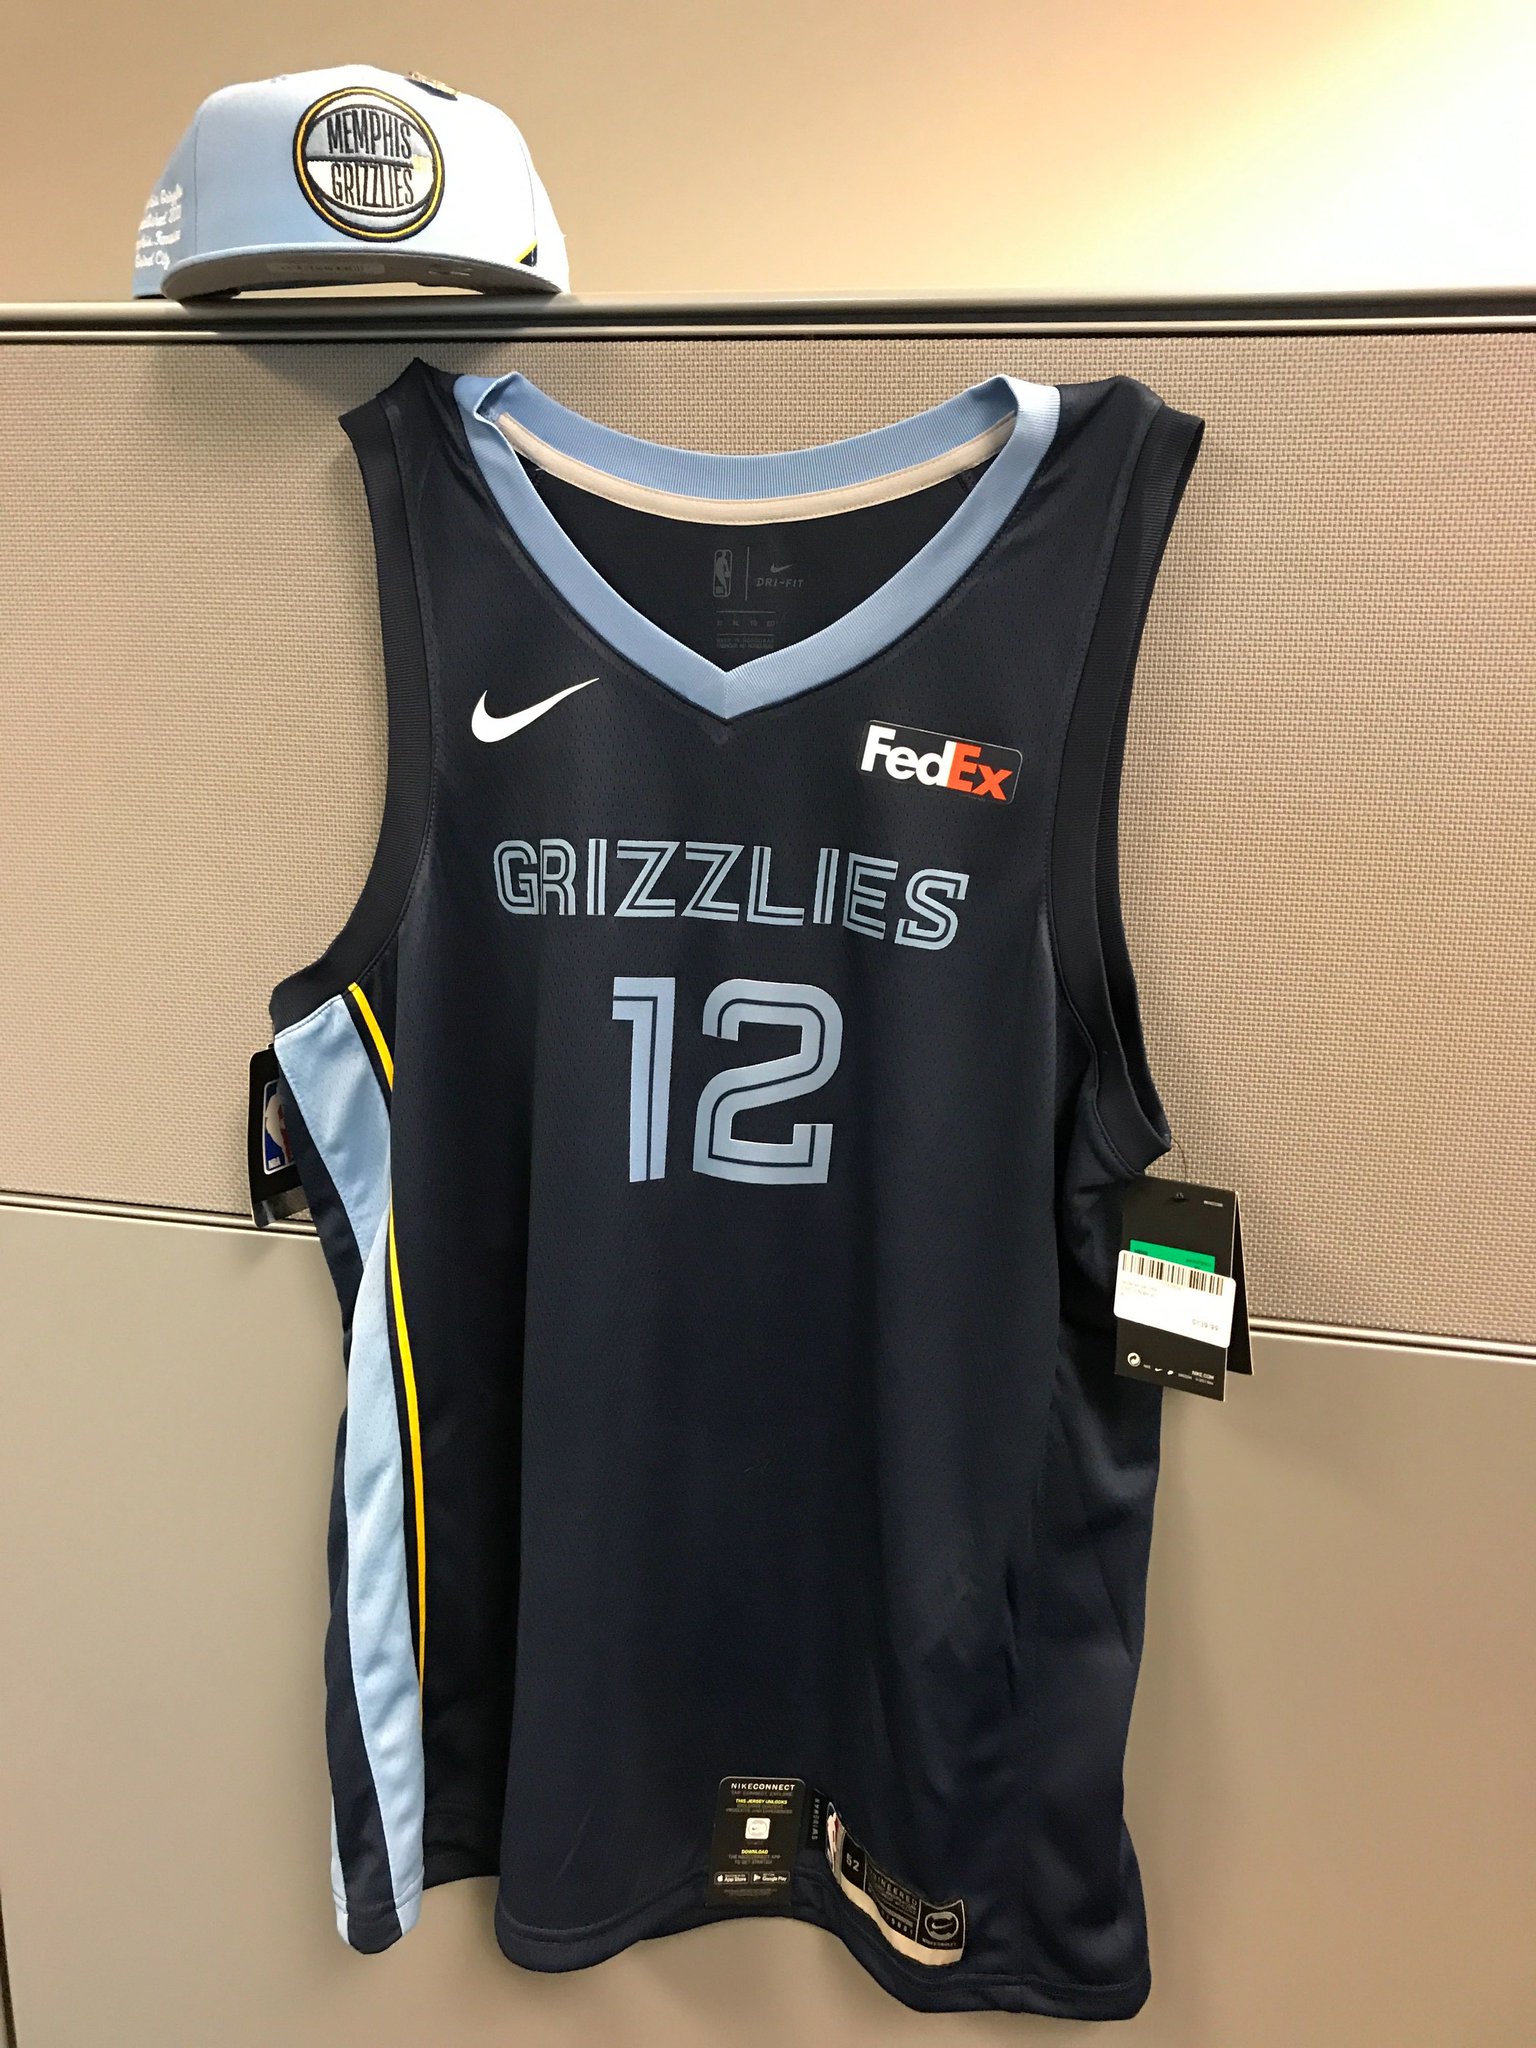 Memphis Grizzlies on X: Straight from the Grizz Den to our office